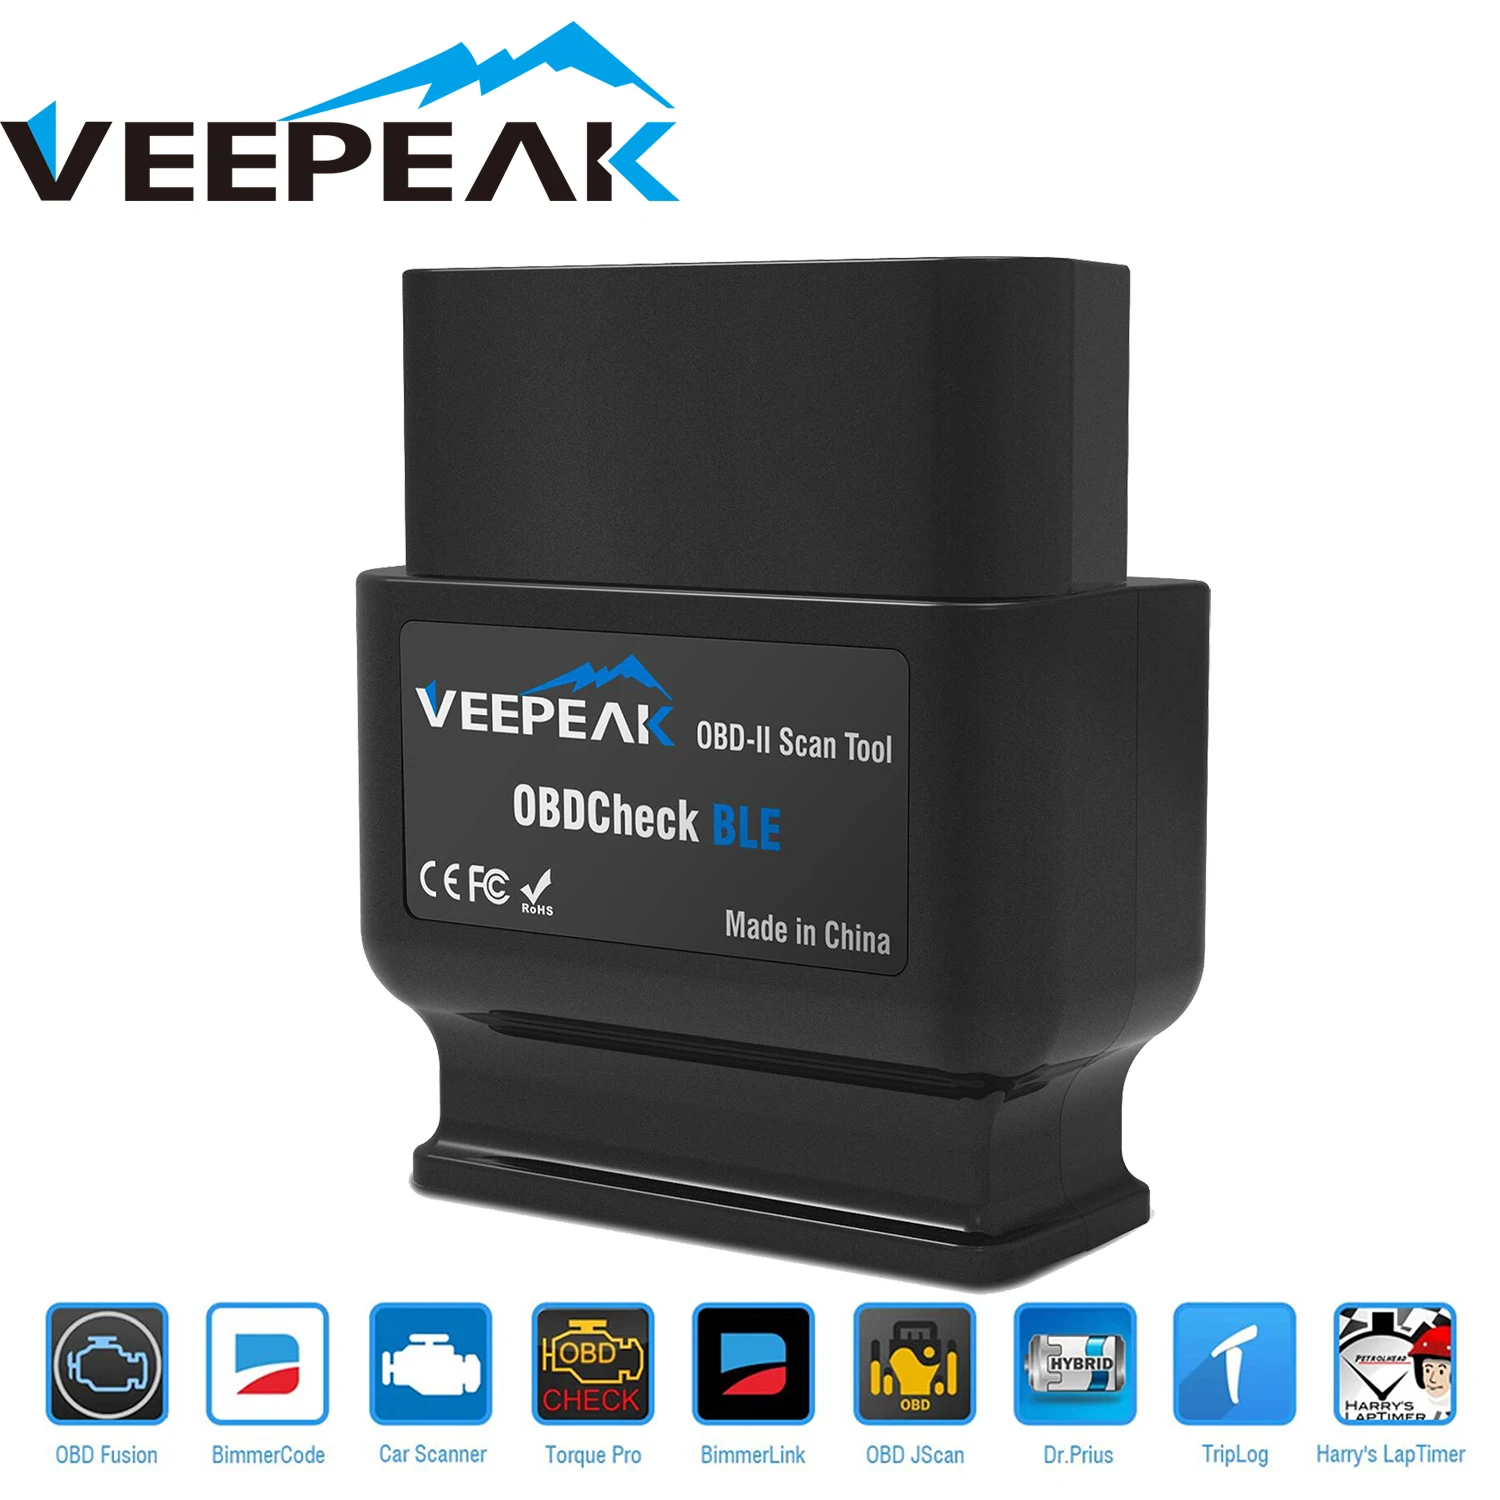 Veepeak OBDCheck BLE OBD2 Bluetooth Scanner Auto OBD II Diagnostic Scan Tool for iOS & Android, BT4.0 Car Check Engine foxwell nt650 elite obd2 automotive scanner sas a f oil epb brt tps 26 reset professional auto car diagnostic tool obd2 scanner